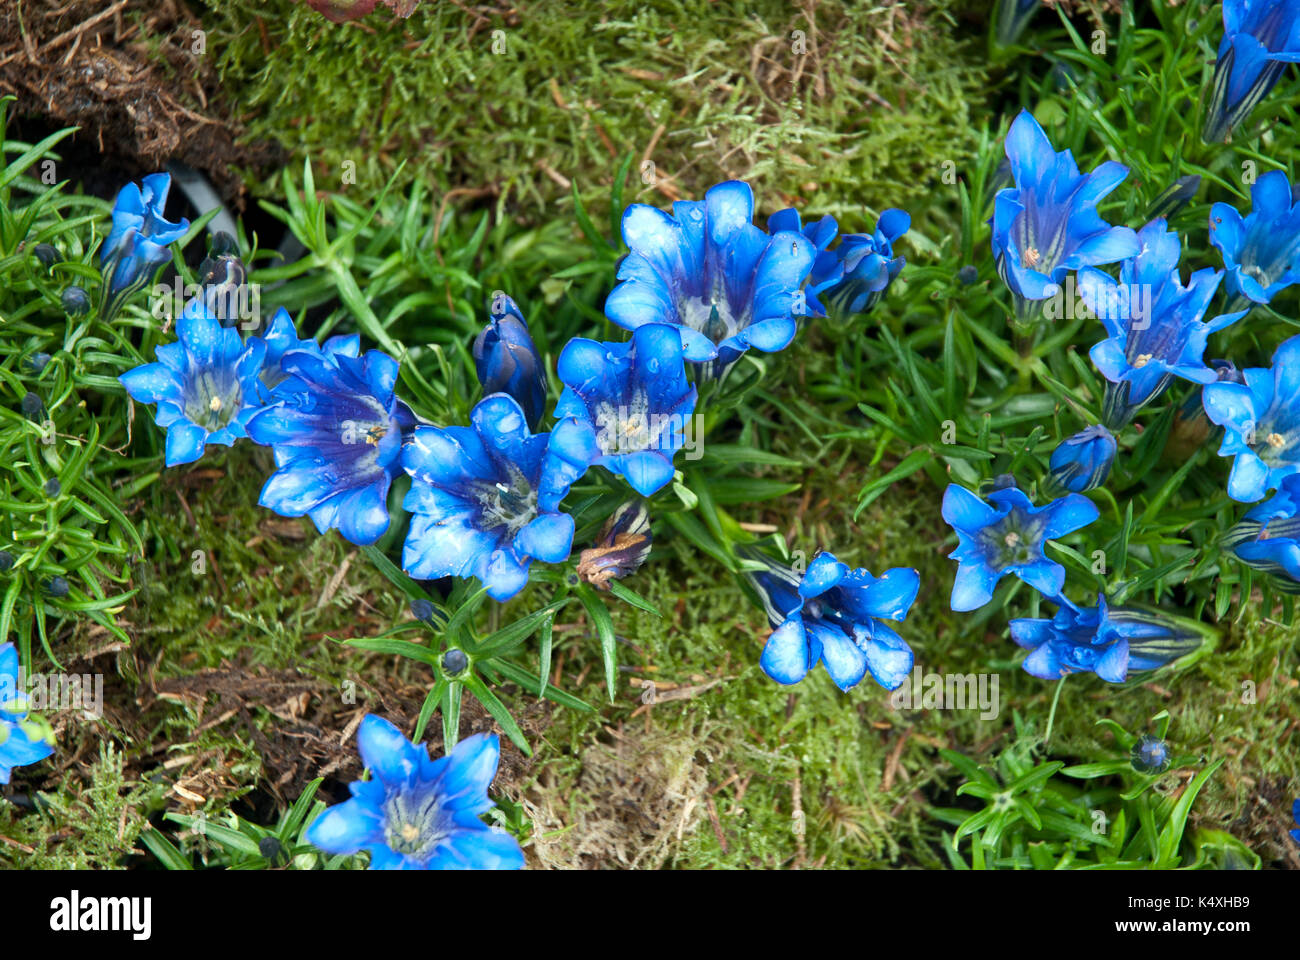 Bright blue gentian violets growing in mossy garden, gentian acaulis (gentiana,gentianeae,gentianinae) Stock Photo